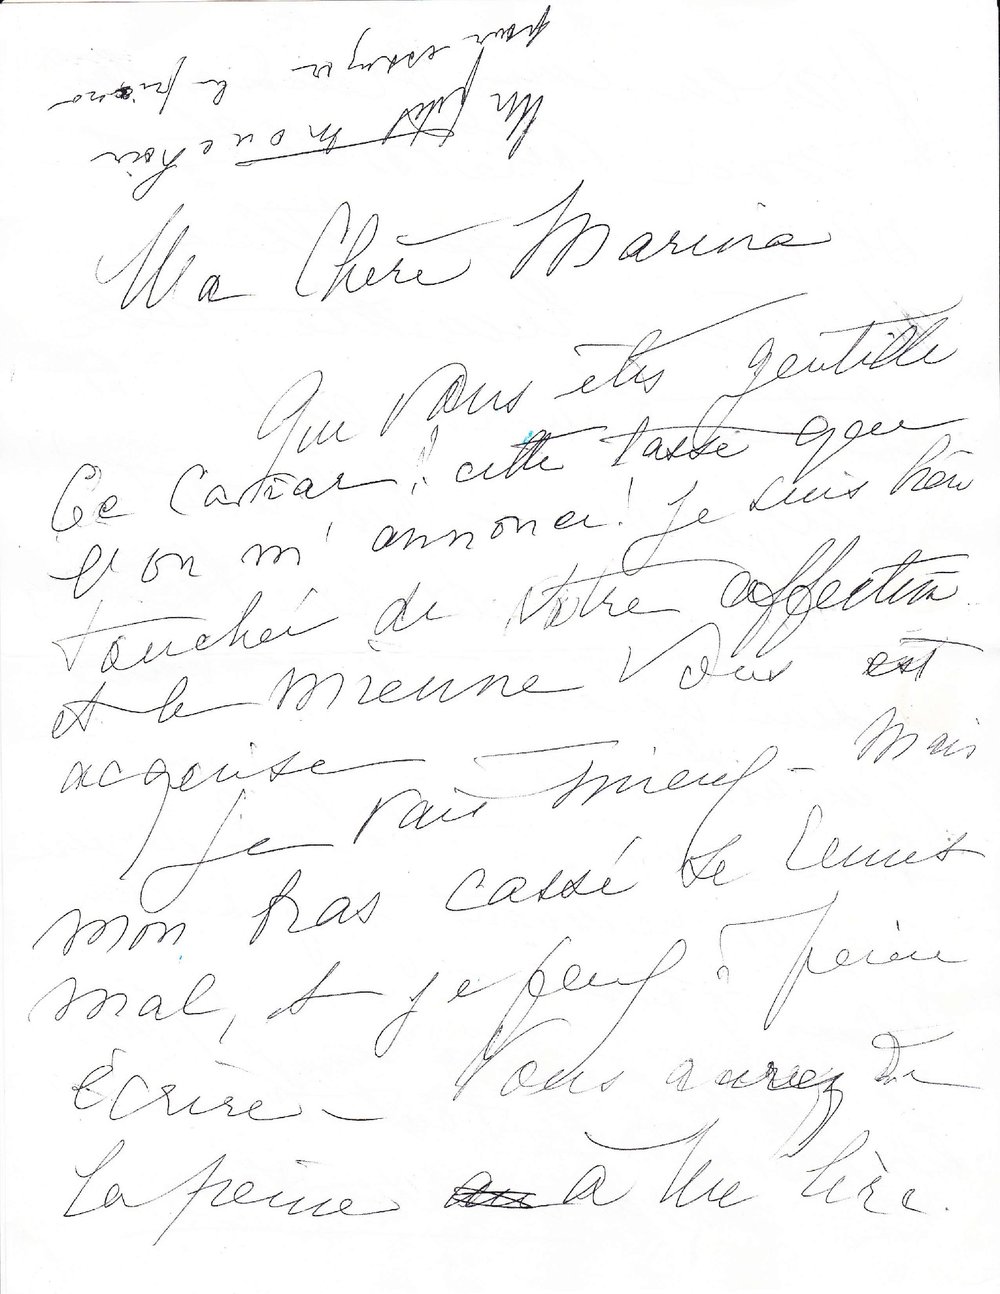 Letter from Marguerite Long to Mdivani (first page)